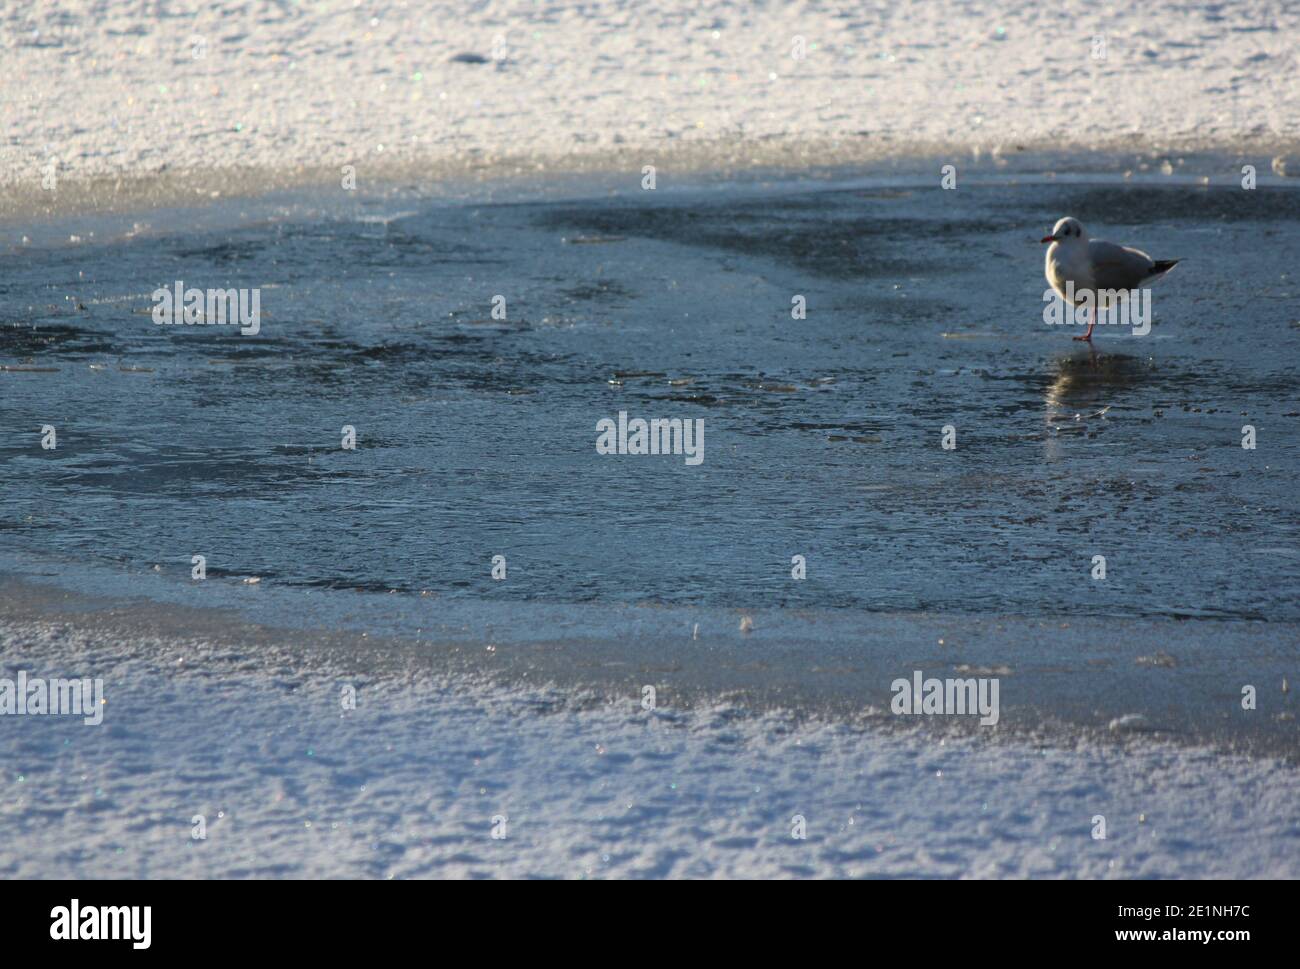 Solitary seagull standing on frozen freshwater lake. Public parks and public spaces during the winter season. Winter images of birds. Solitary seagull. Stock Photo